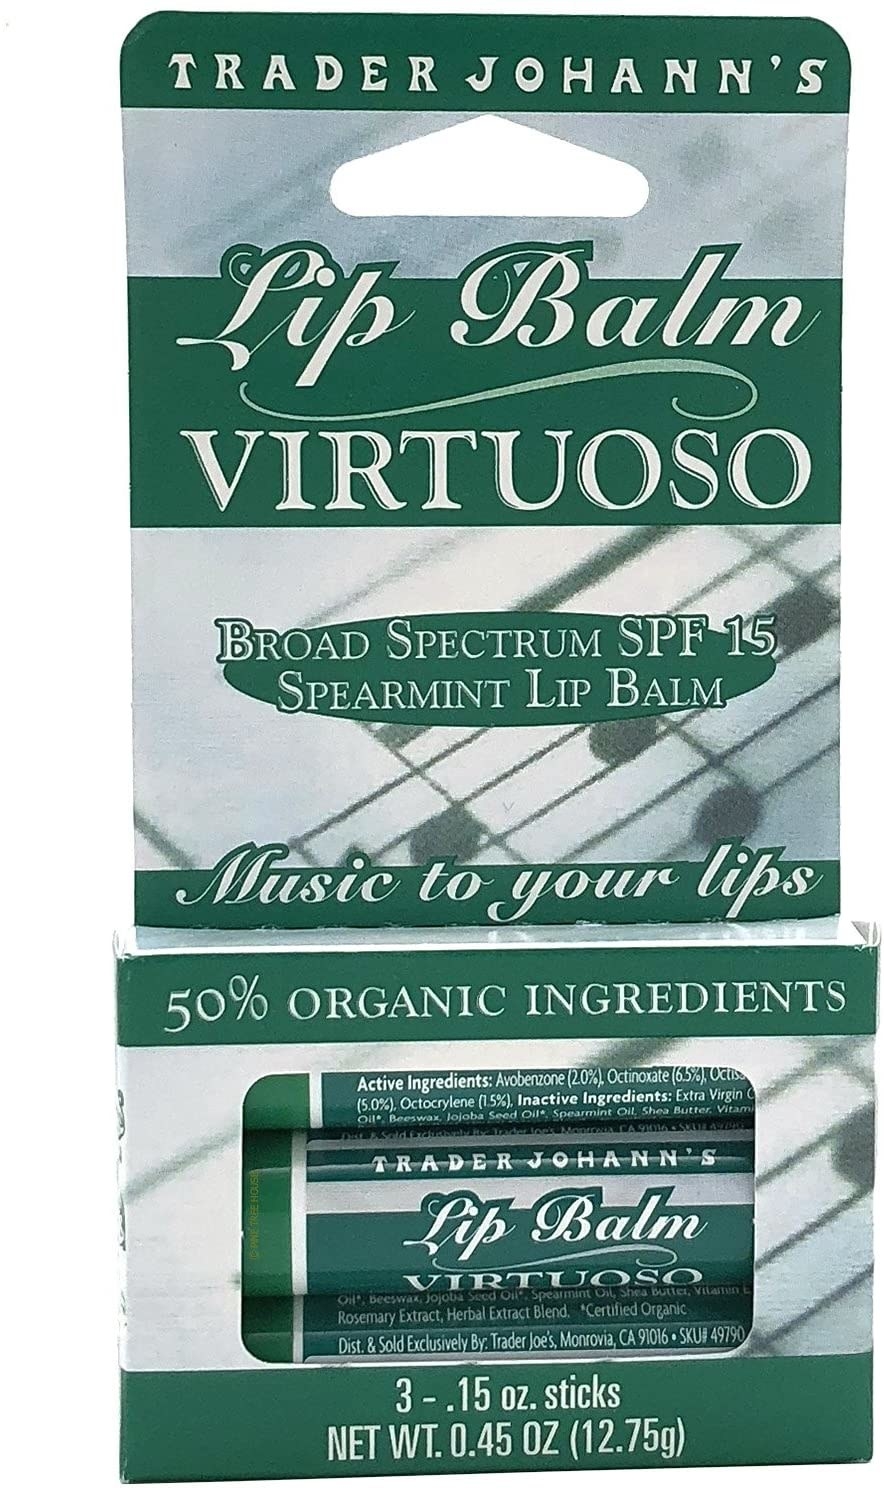 Green and white packaging for a 3-pack of Trader Joe&#x27;s Virtuoso spearmint lip balm